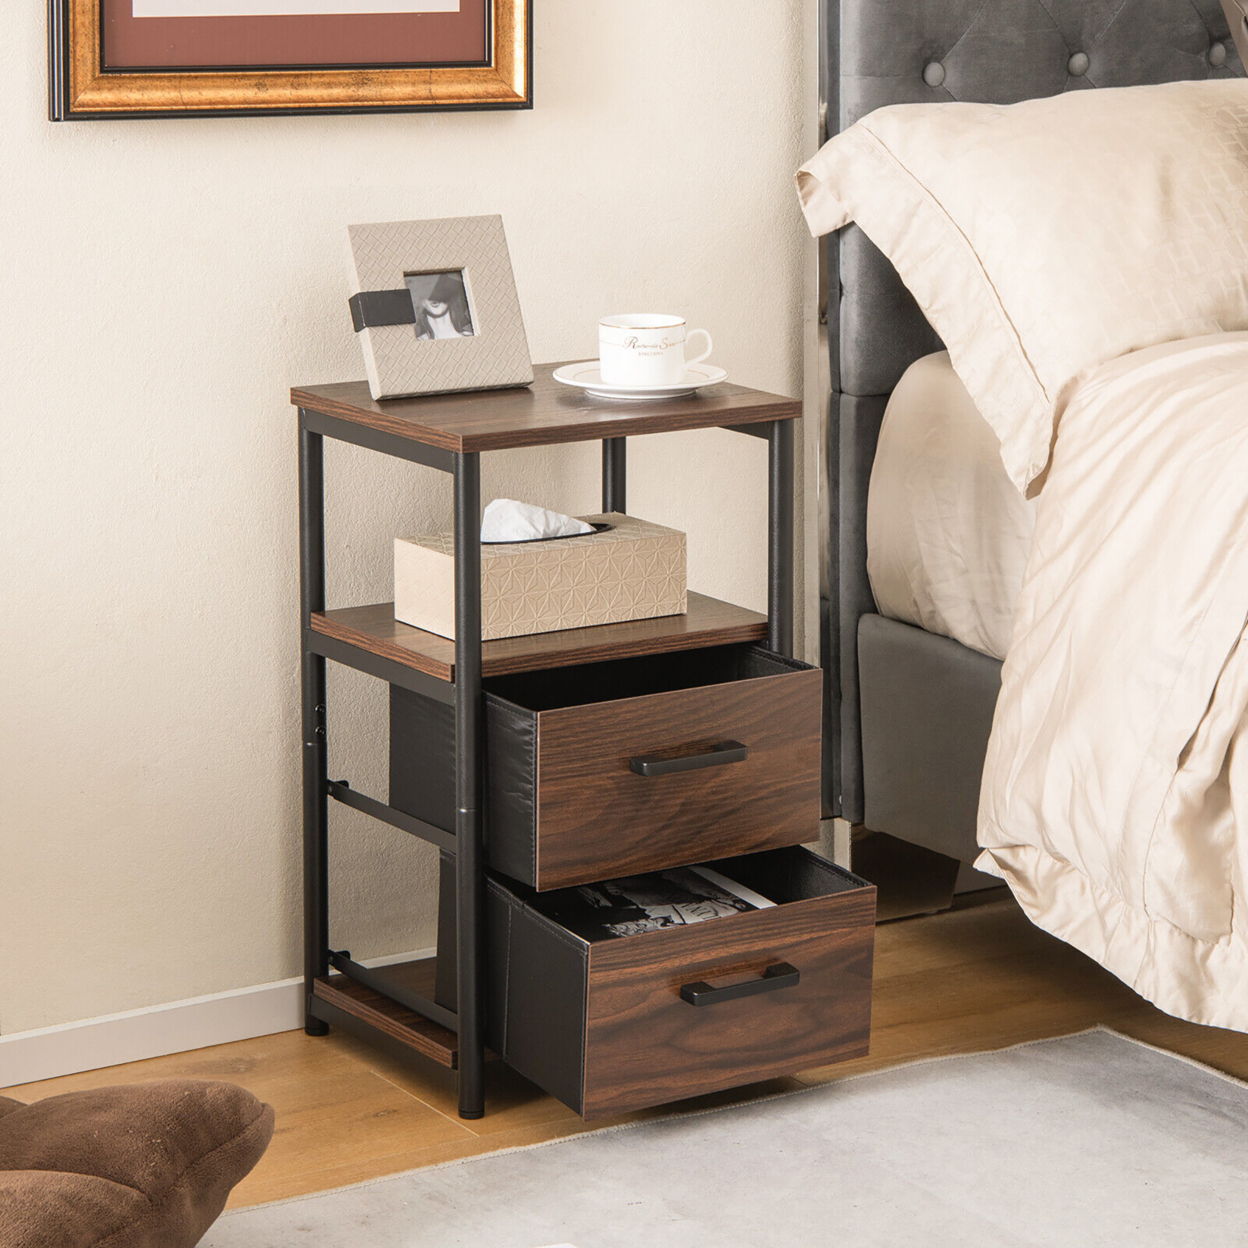 Nightstand Bedside End Table With 2 Fabric Drawers Storage Shelf For Living Room